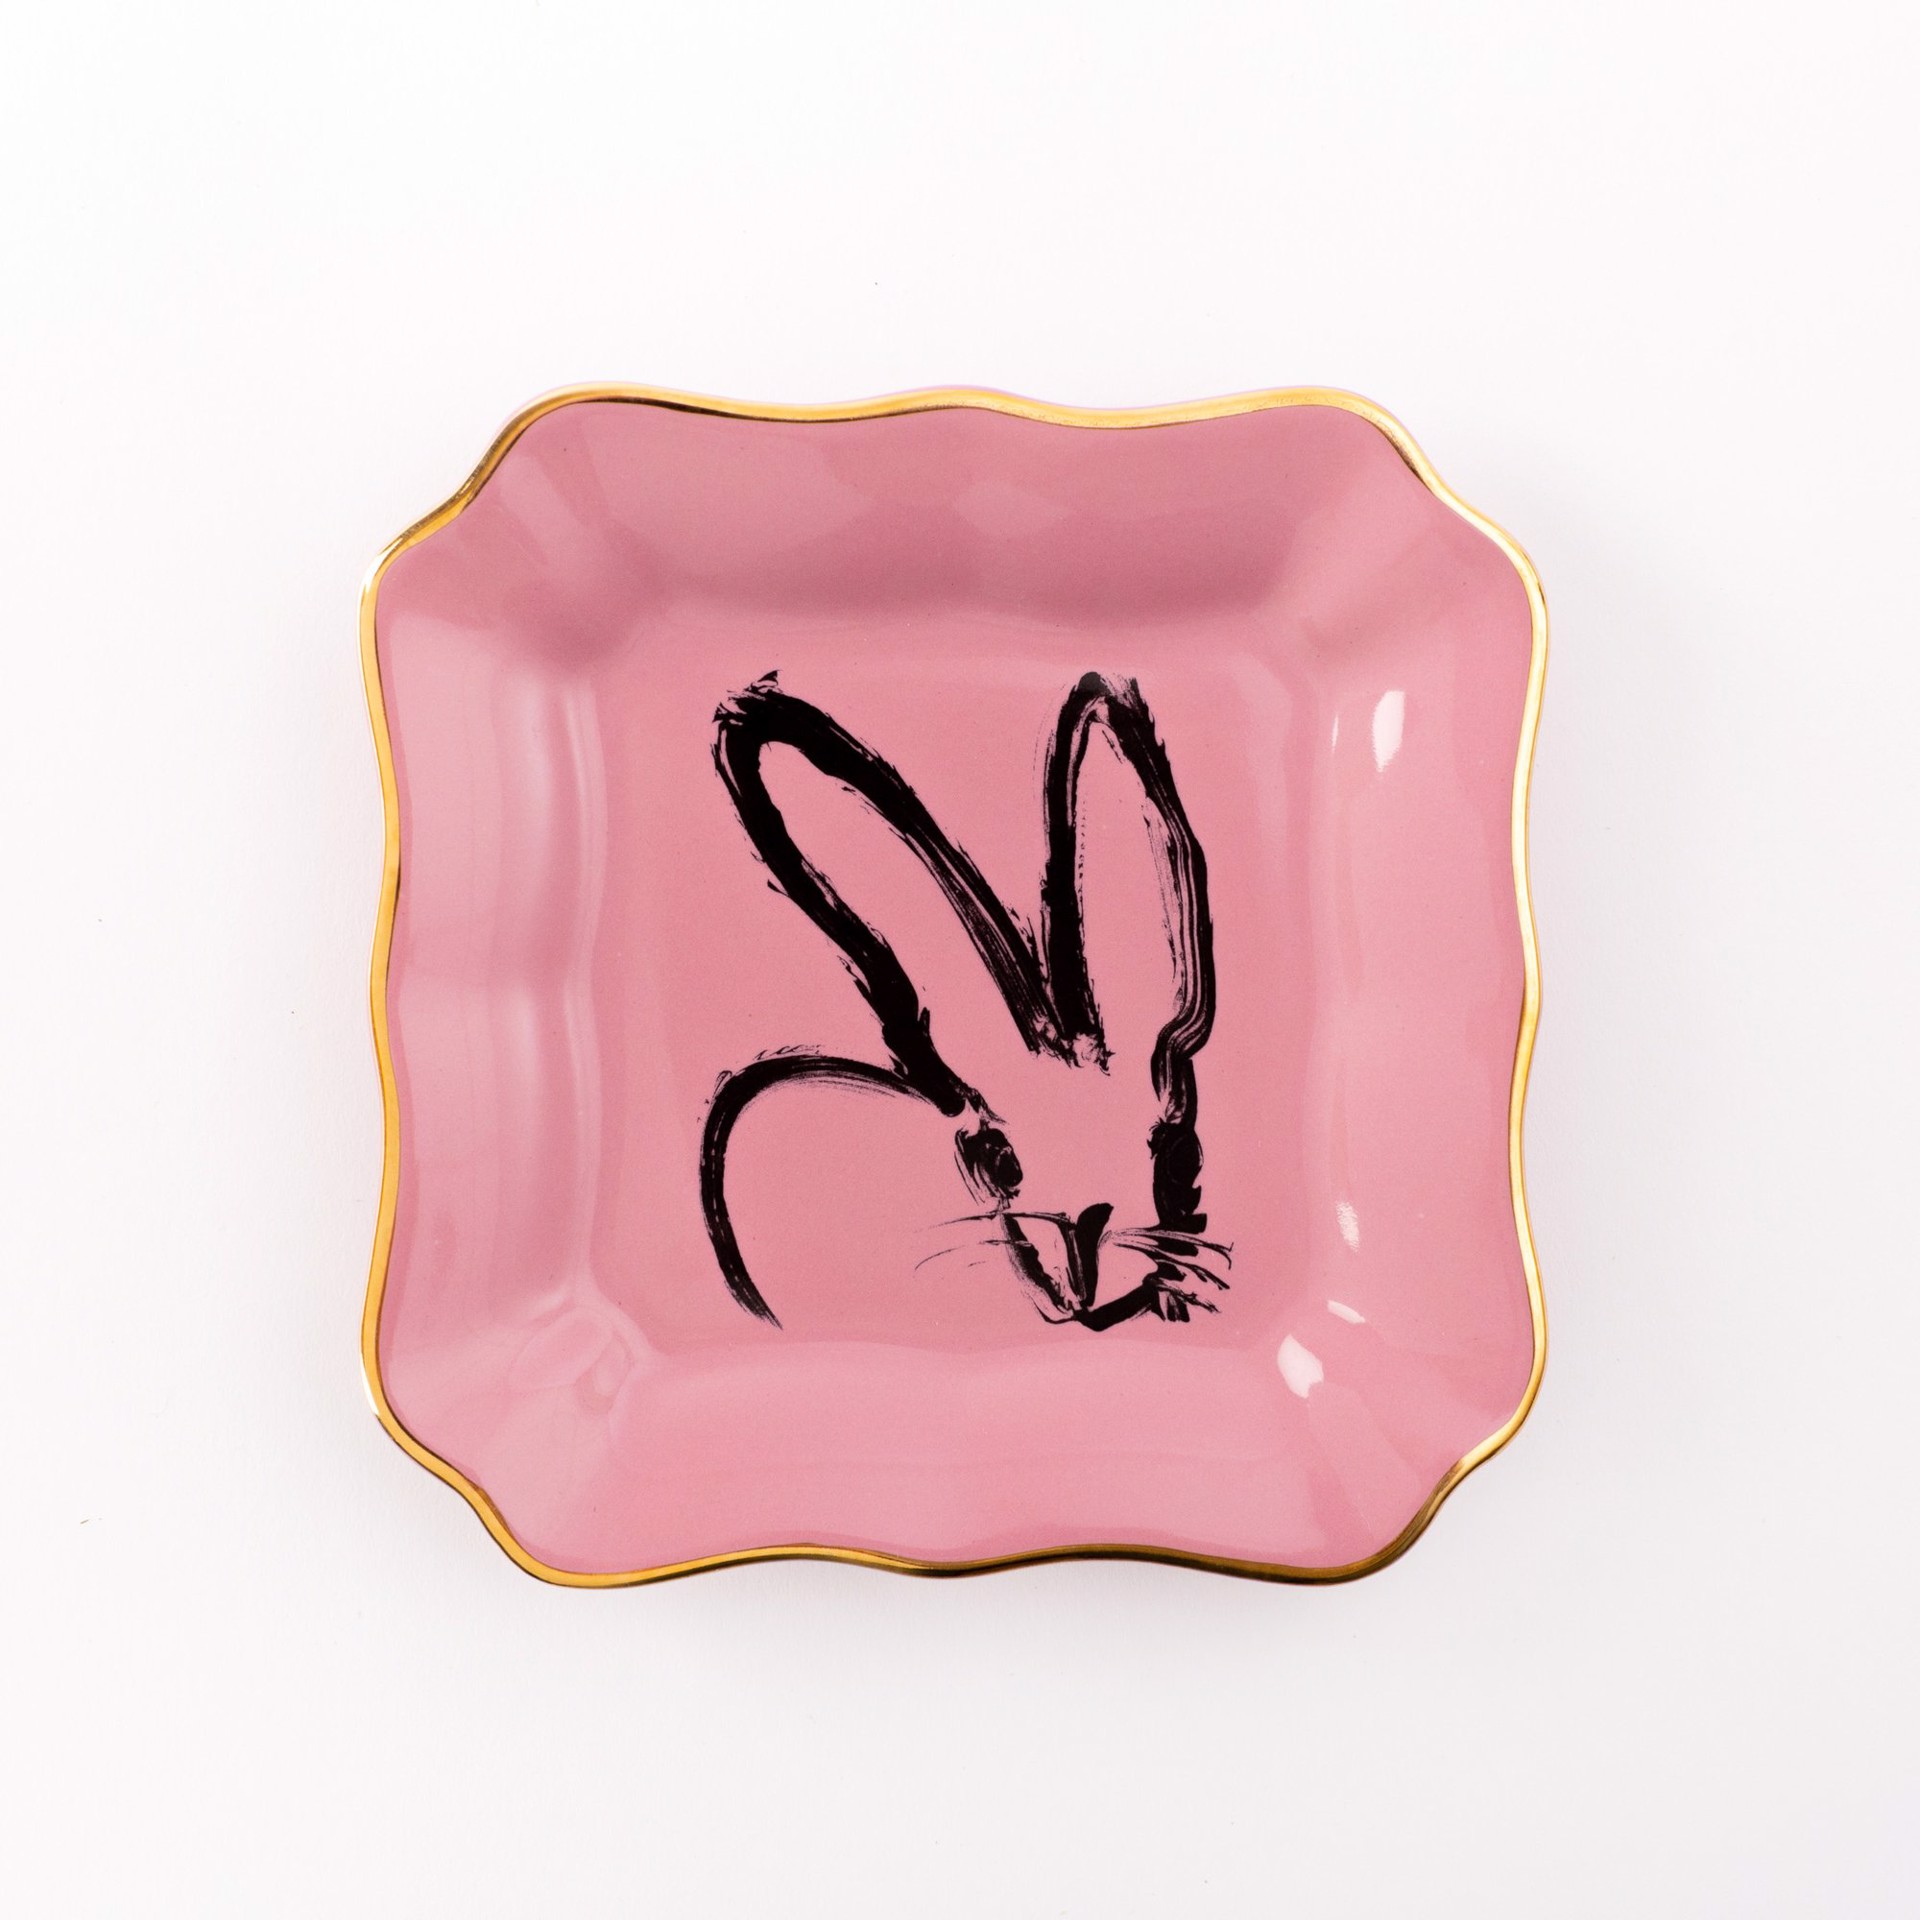 Bunny Portrait Plates: Pink with Gold by Hunt Slonem